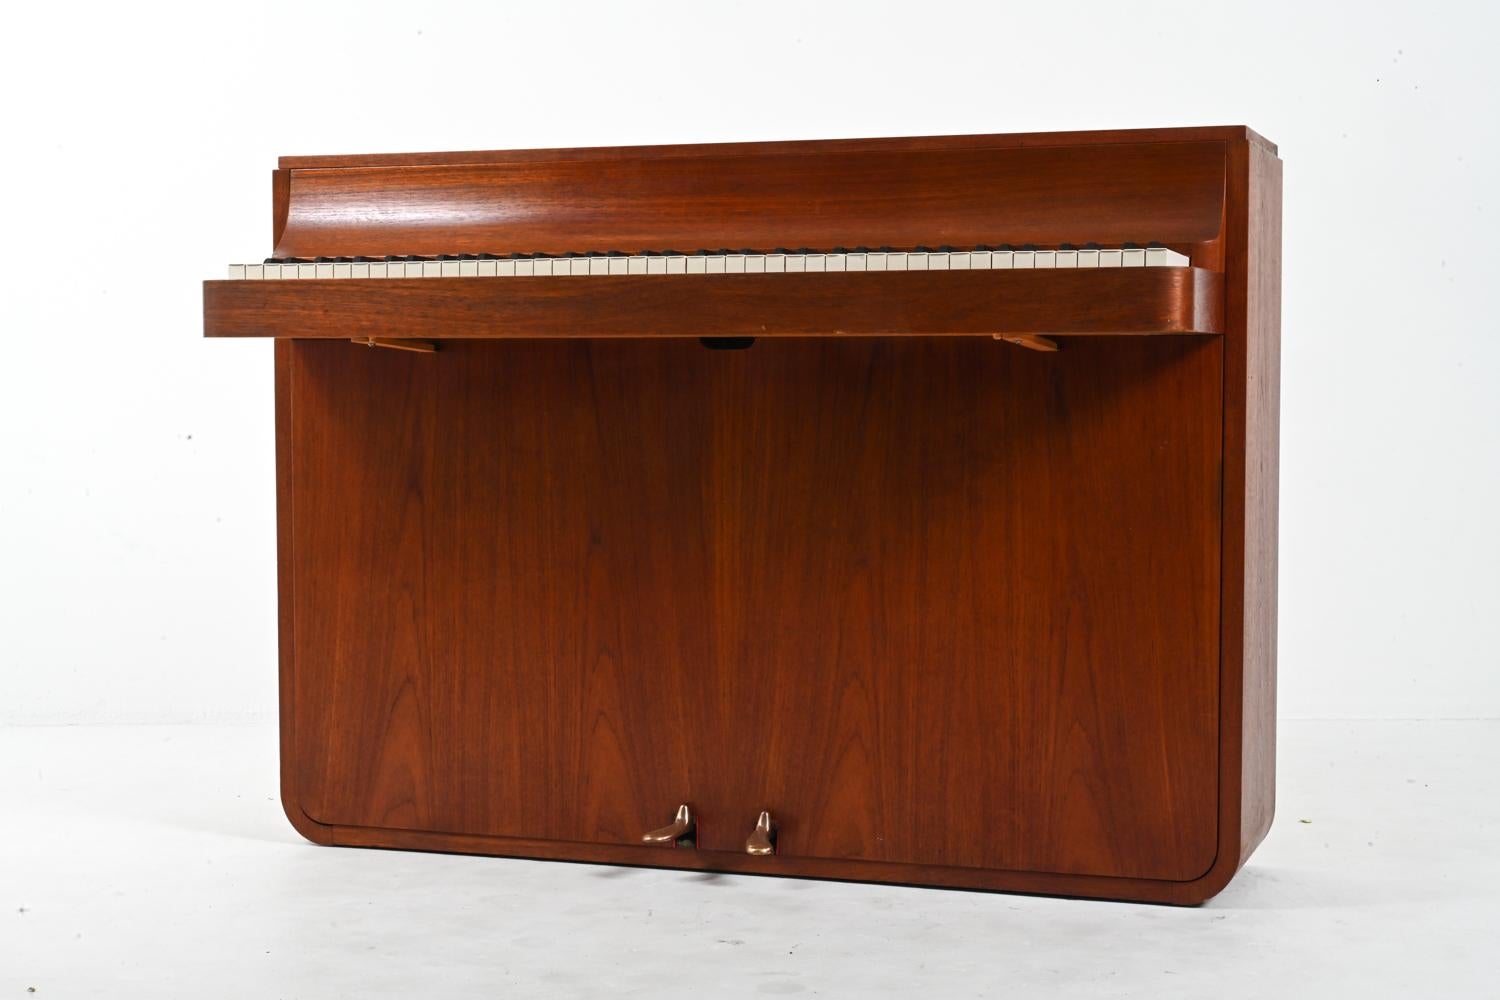 Step back in time with this masterfully-crafted Danish Mid-Century Teak Pianette by the renowned Louis Zwicki. From the heart of the 1960's, a period when design and craftsmanship merged in perfect harmony, this pianette encapsulates the very